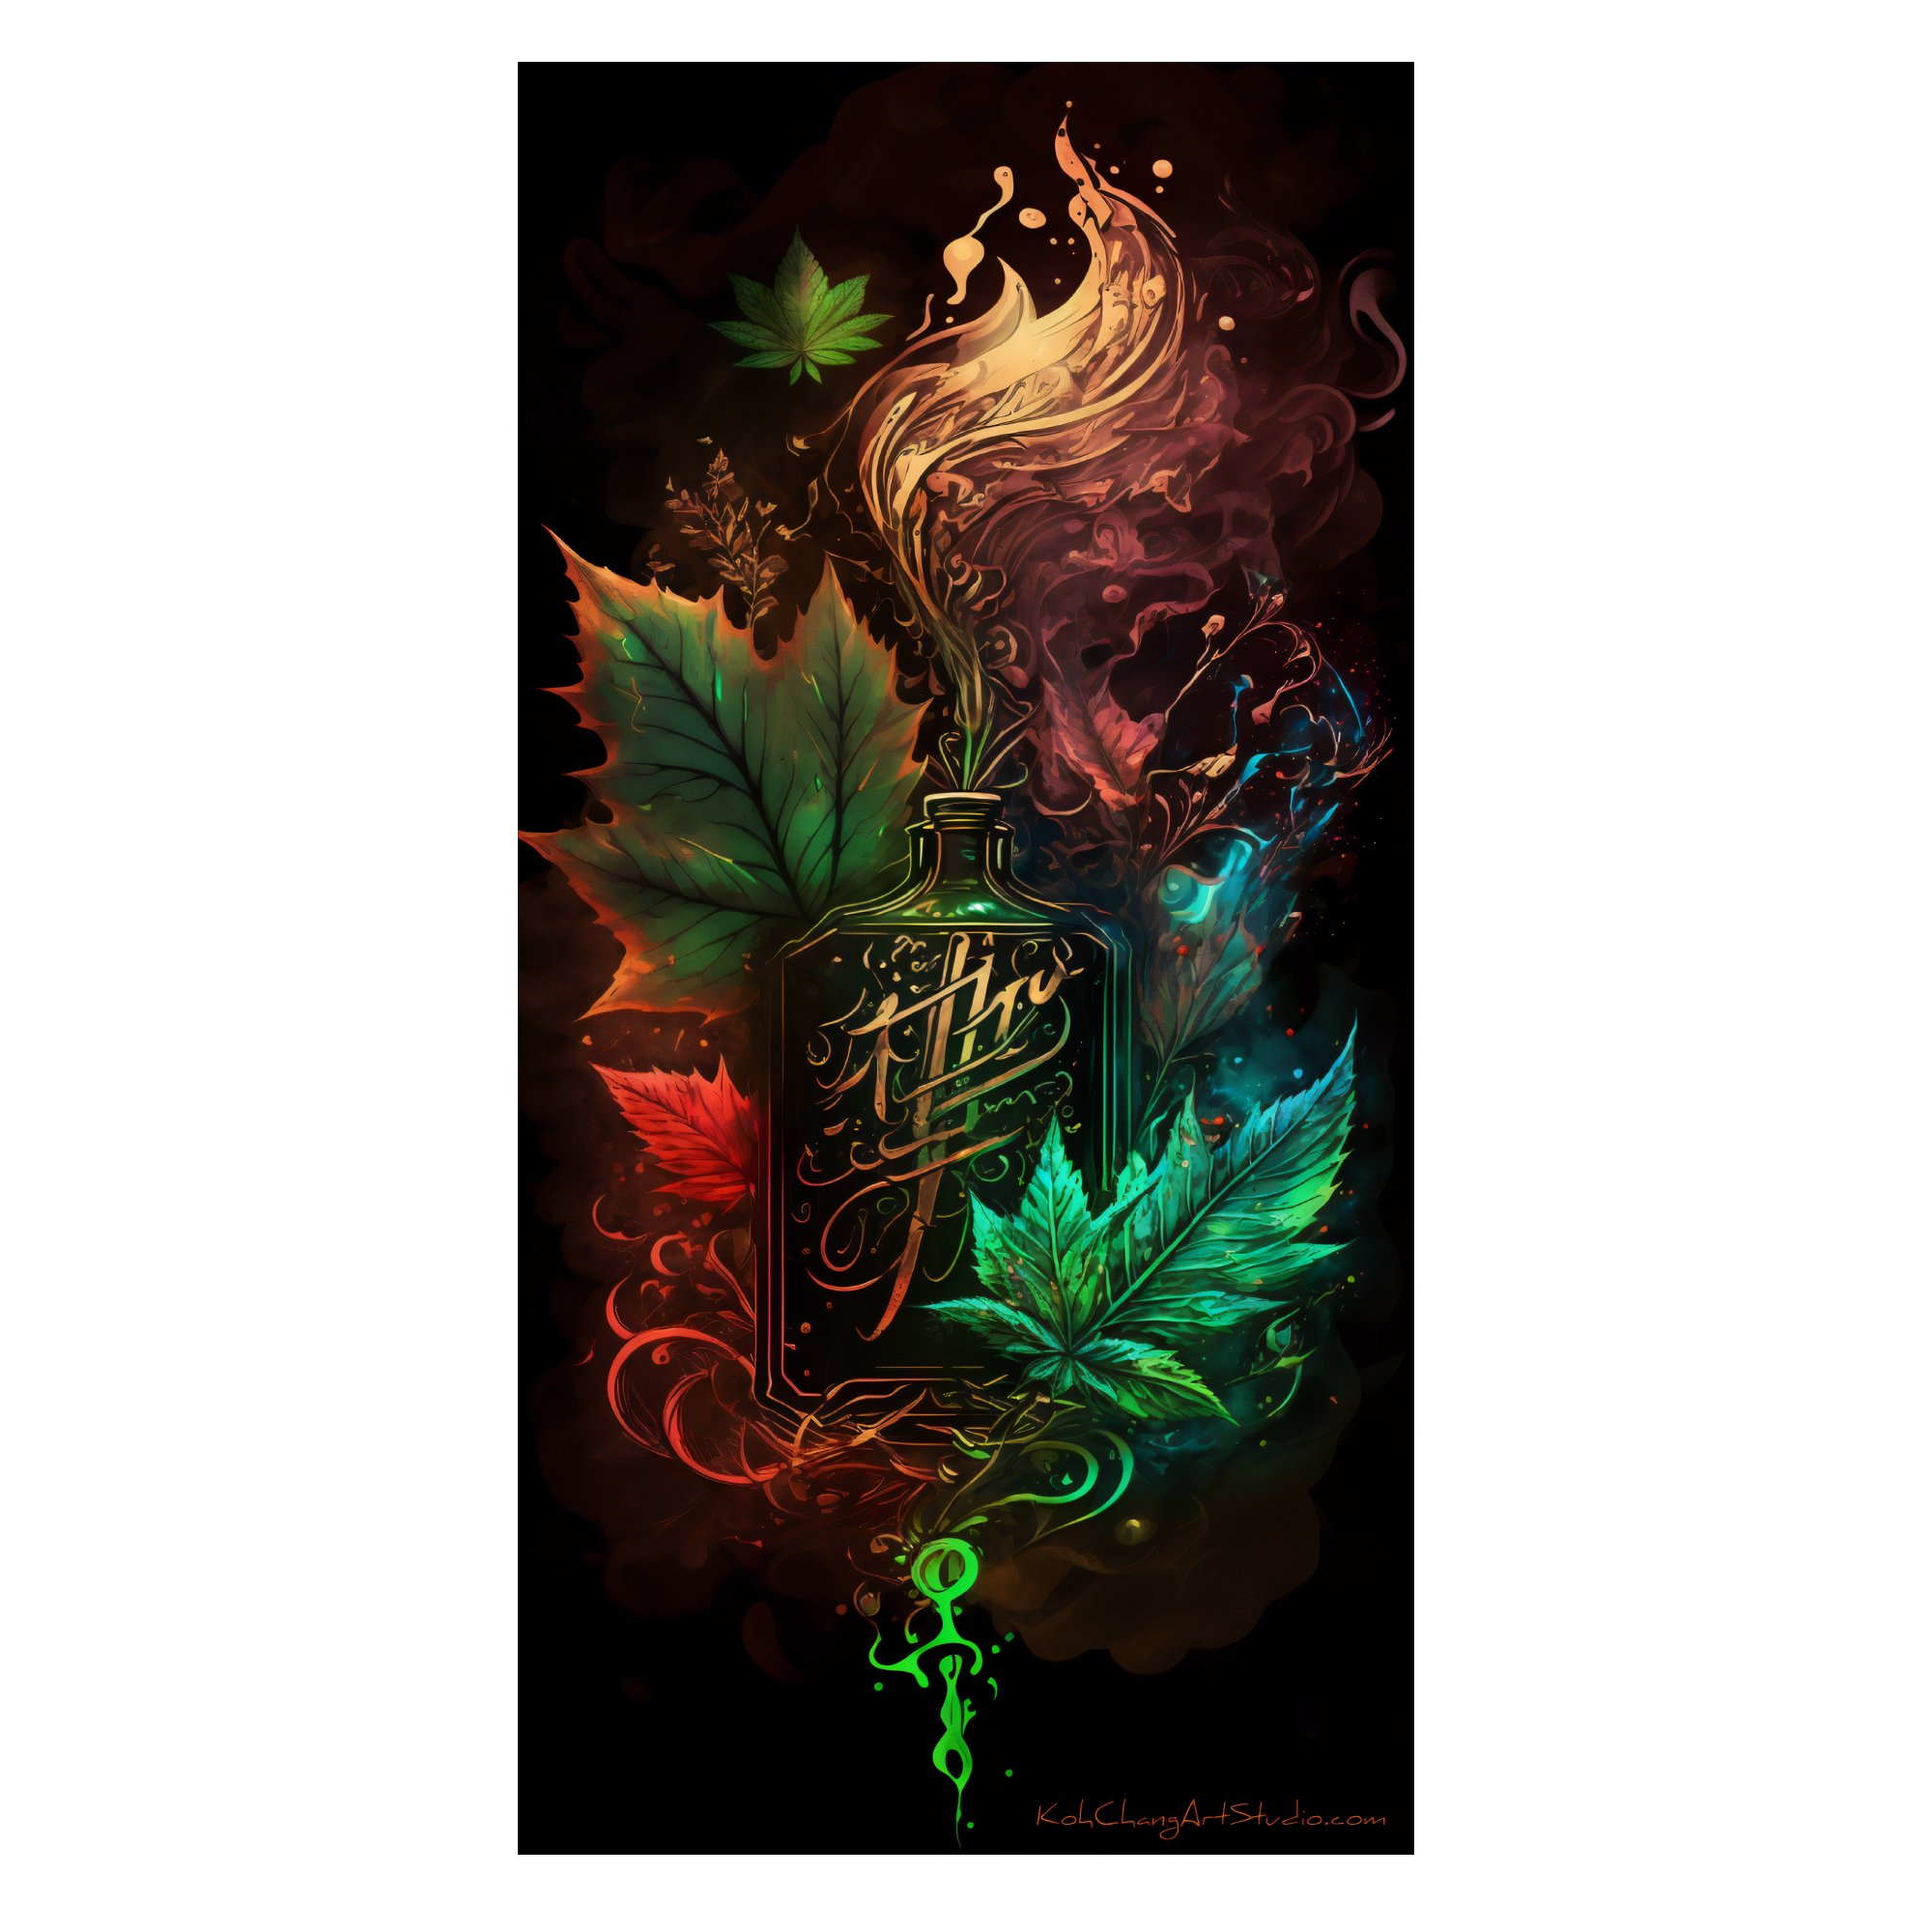 ELIXIR Artistic Depiction - An emerald guardian intertwined with leaves and vines, symbolizing the magic of the sacred herb.